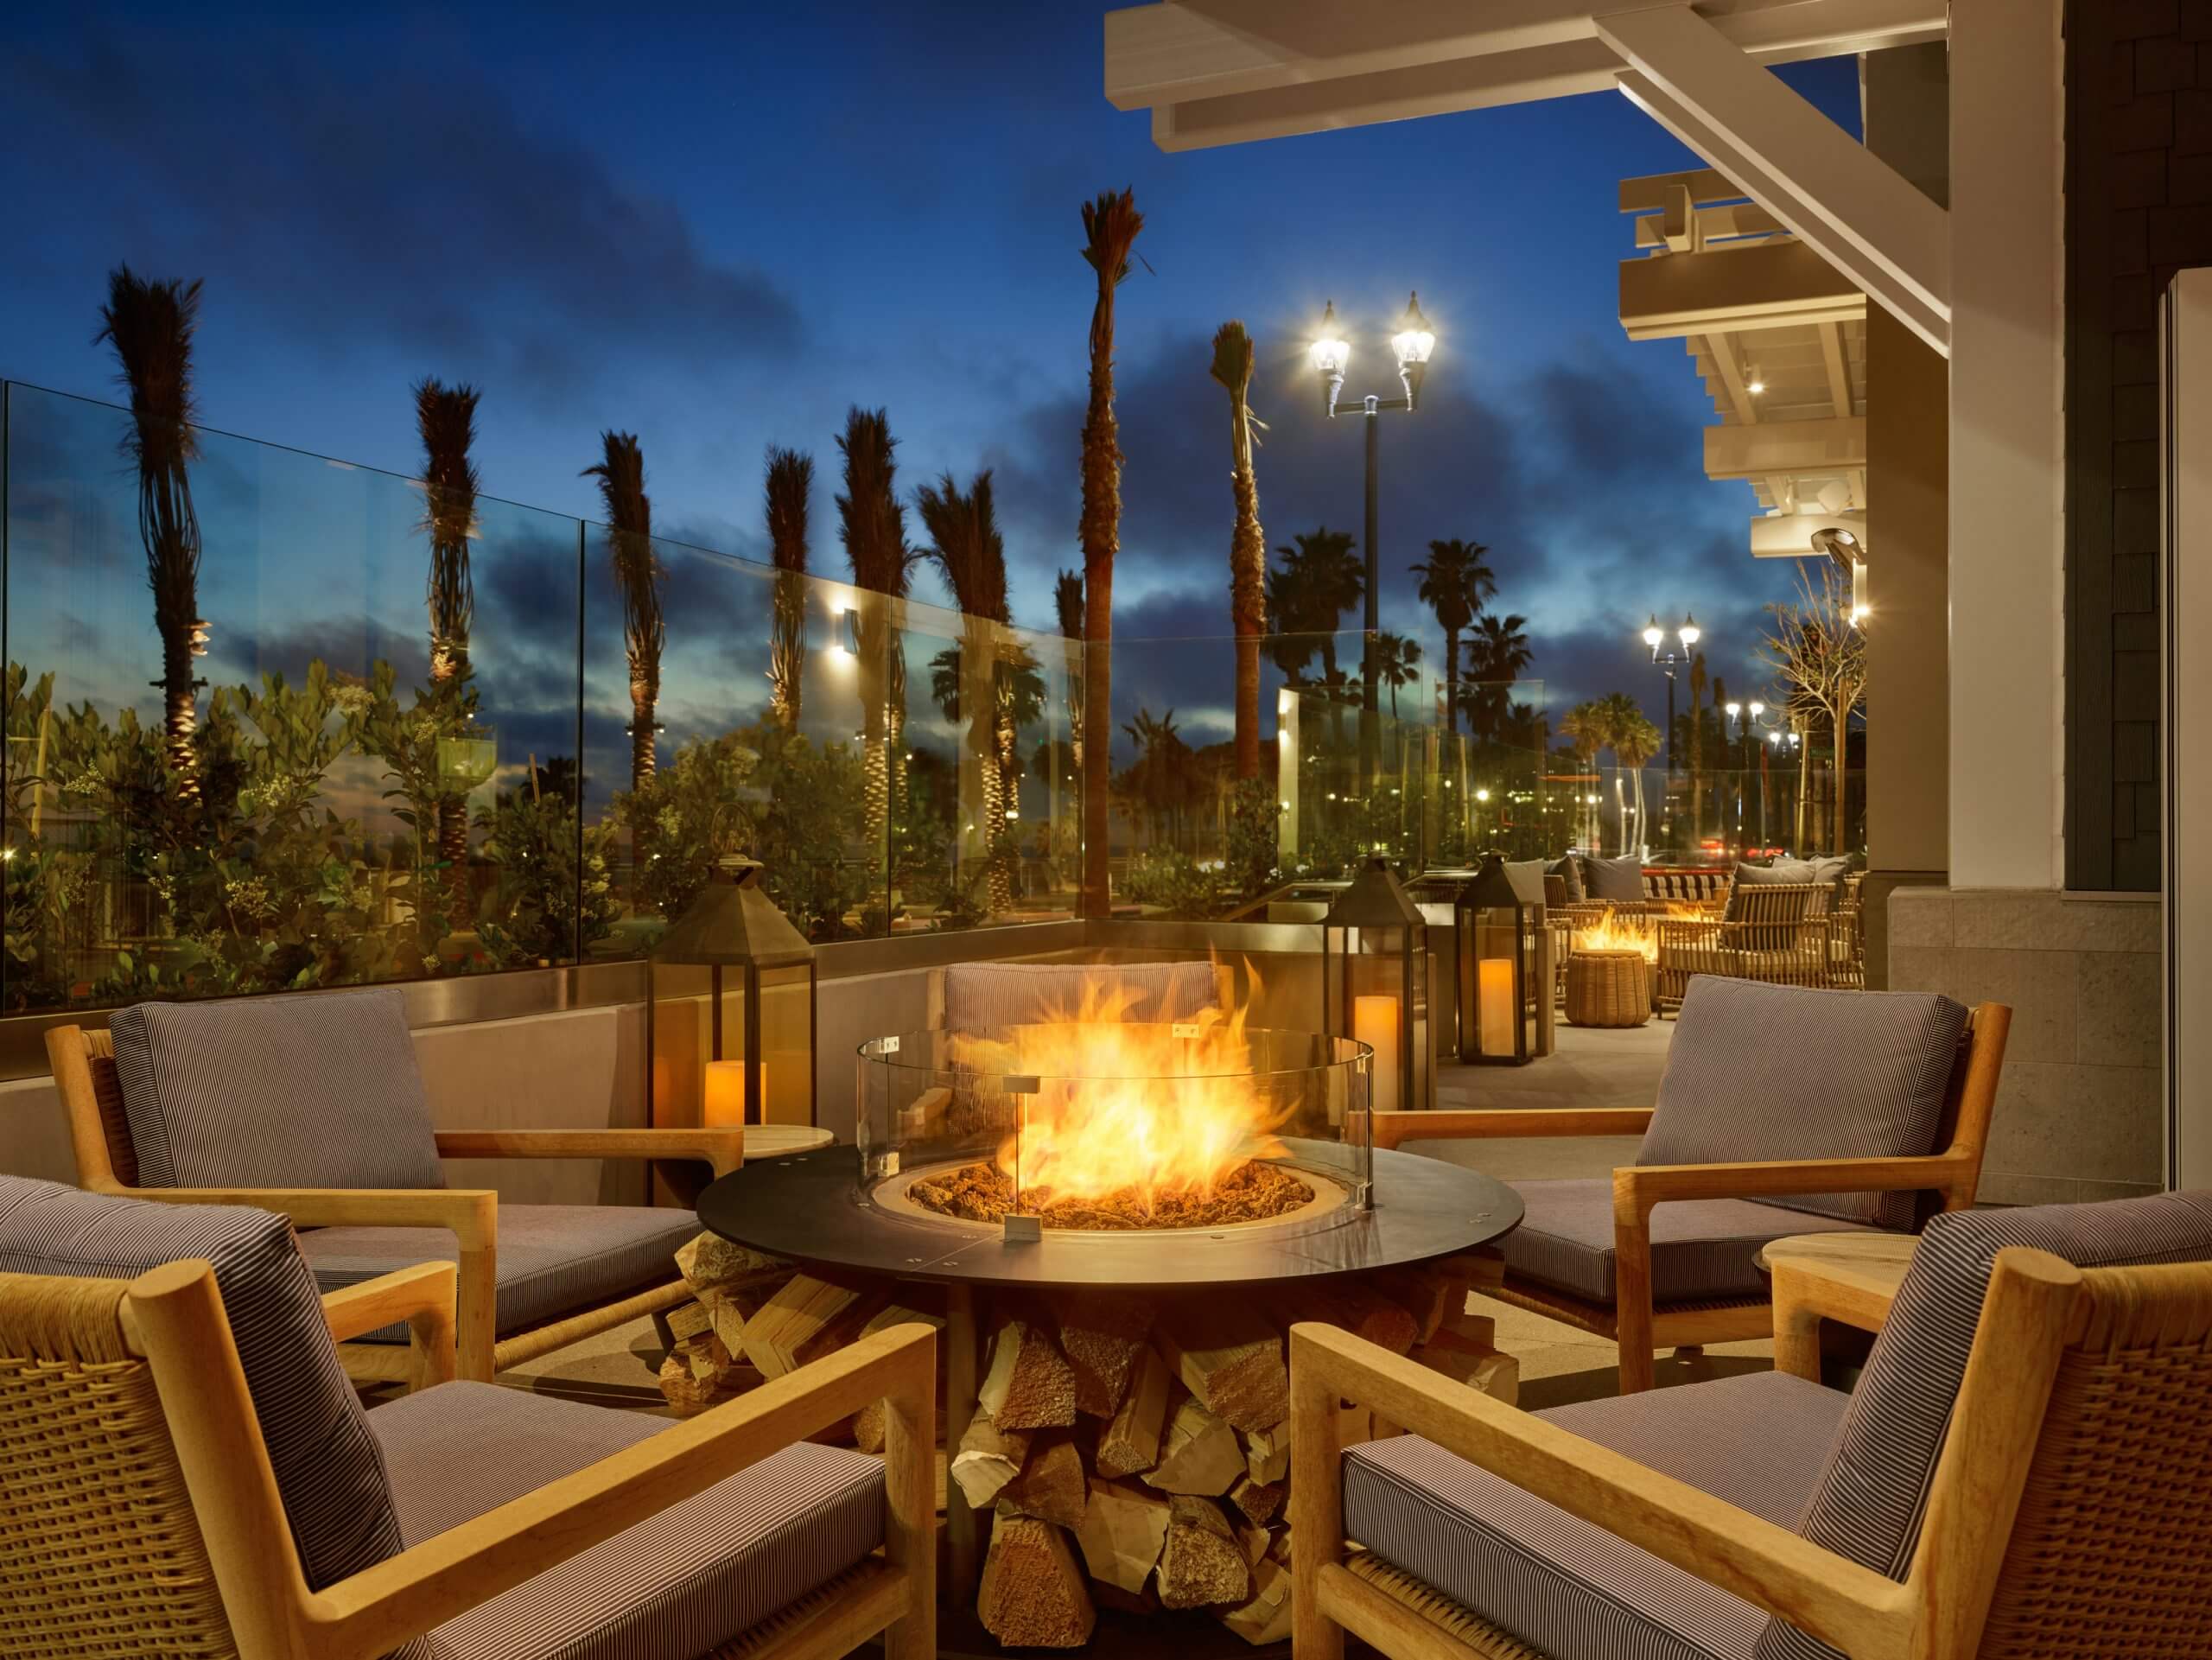 Fireplace at the Oceanside and gray chairs